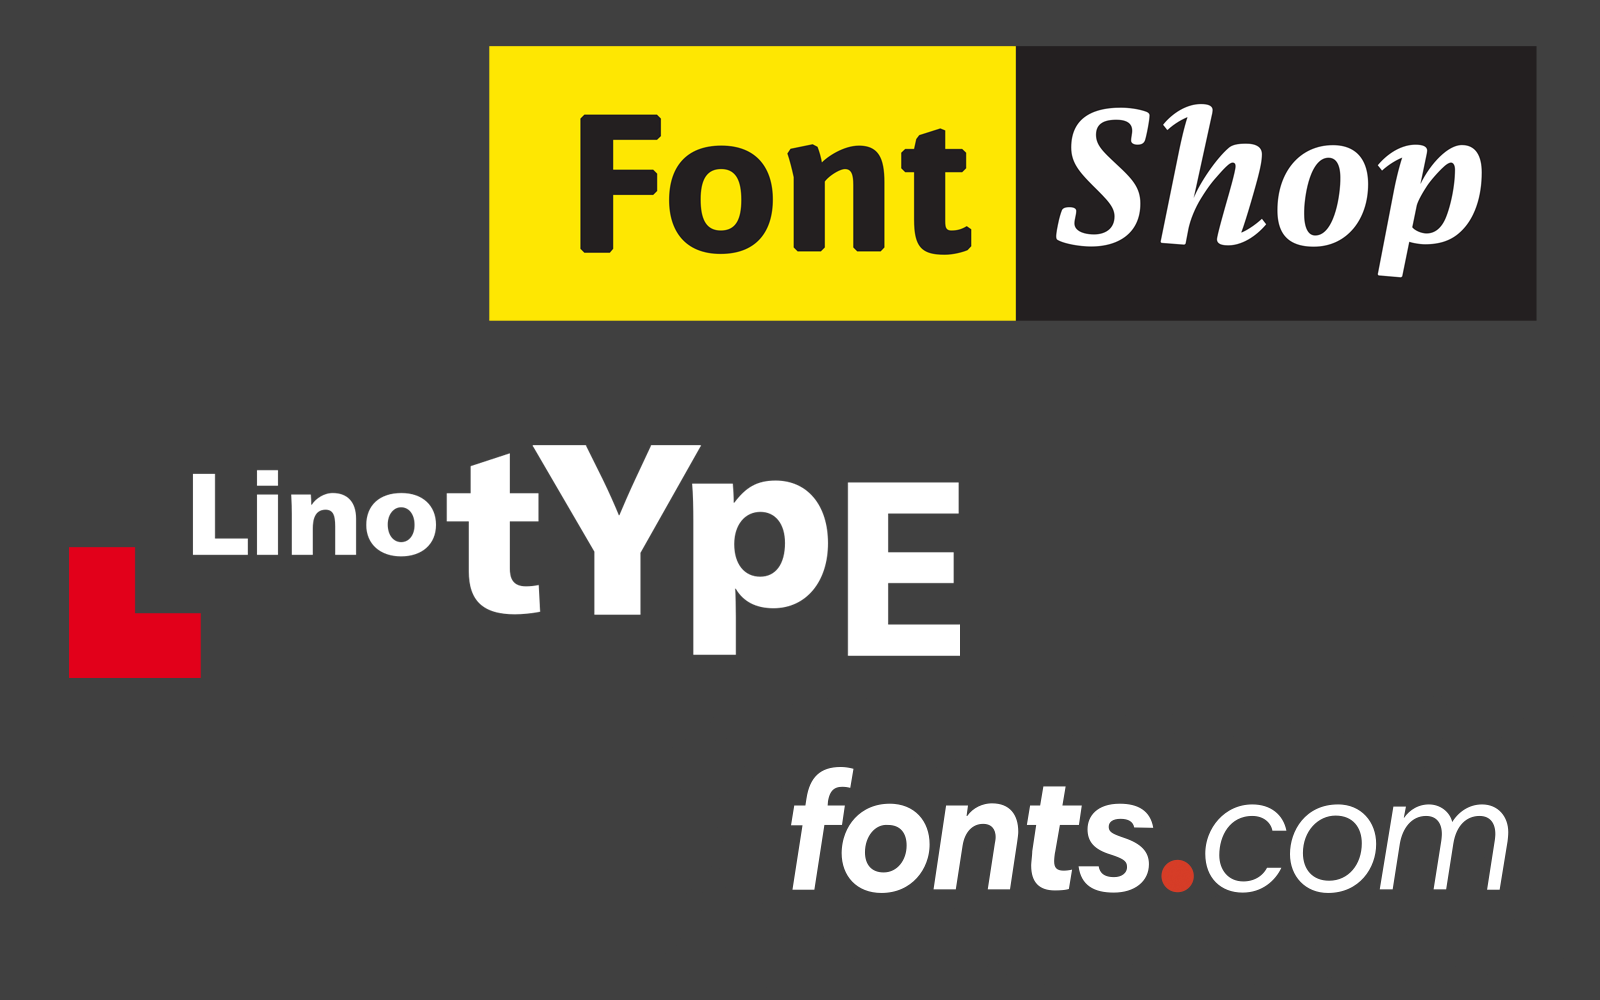 More information about "Monotype discontinues Fontshop.com, Linotype.com and Fonts.com"